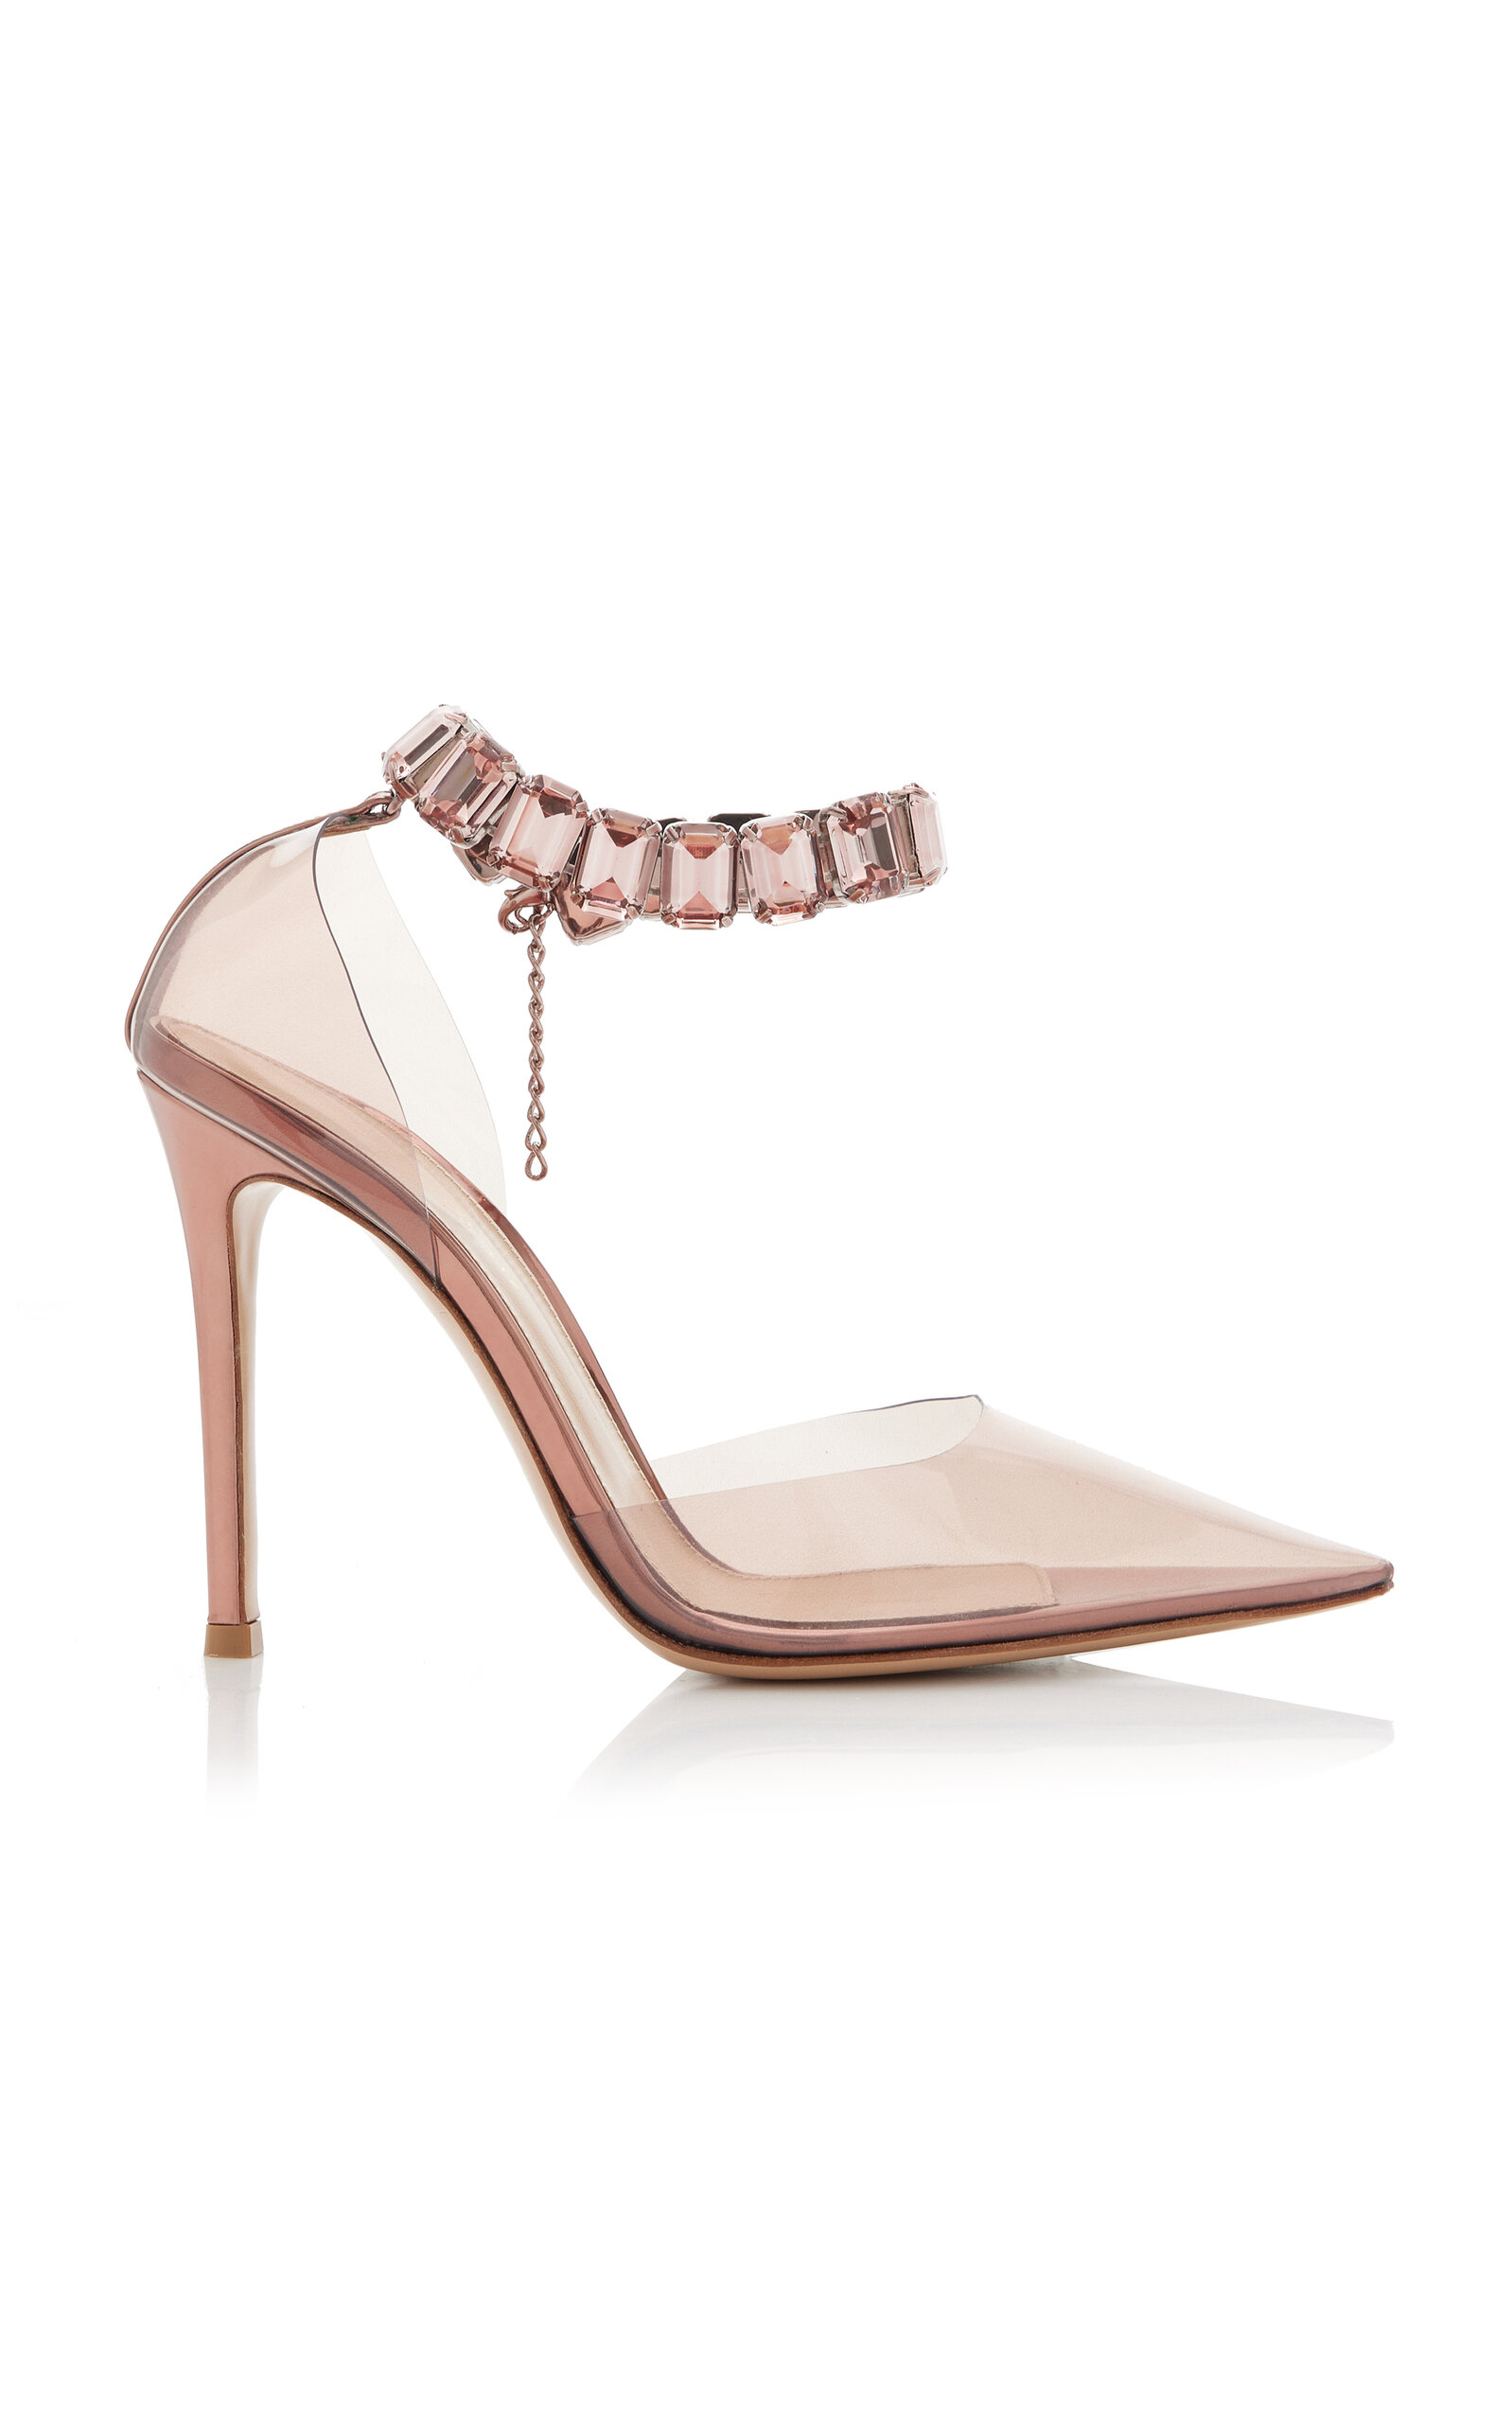 Gianvito Rossi Women's Crystal-Embellished PVC Pumps